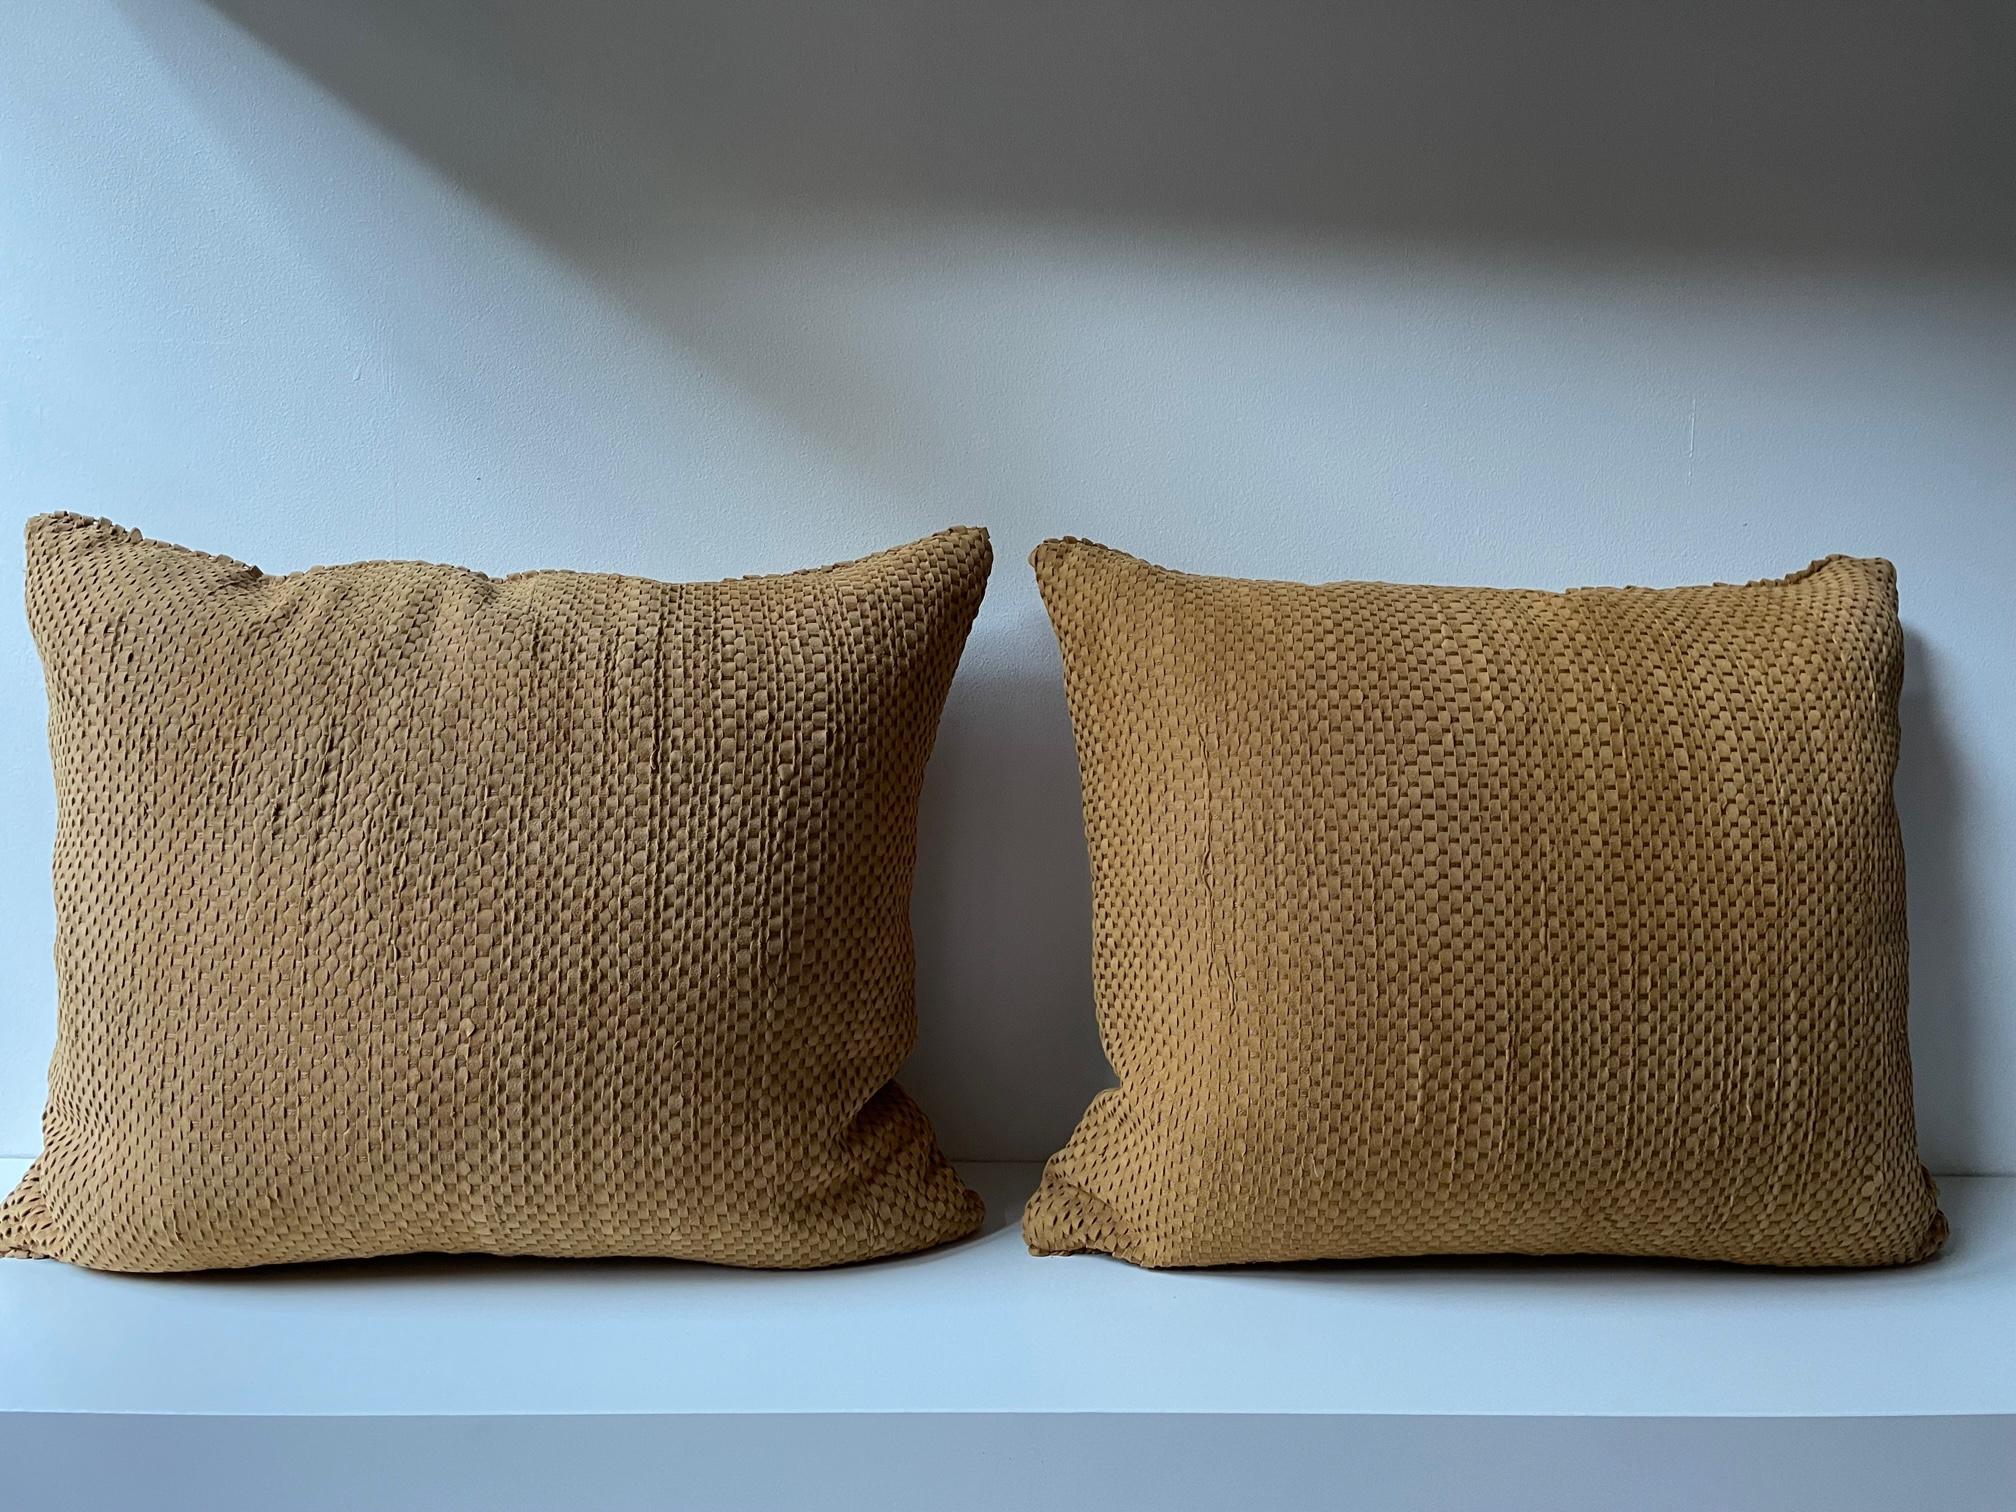 Hand woven Suede cushions colour GINGER, back side with Suede as shown on image, cushion size 43 x 38cm, silk lining, inner pad with new feathers.